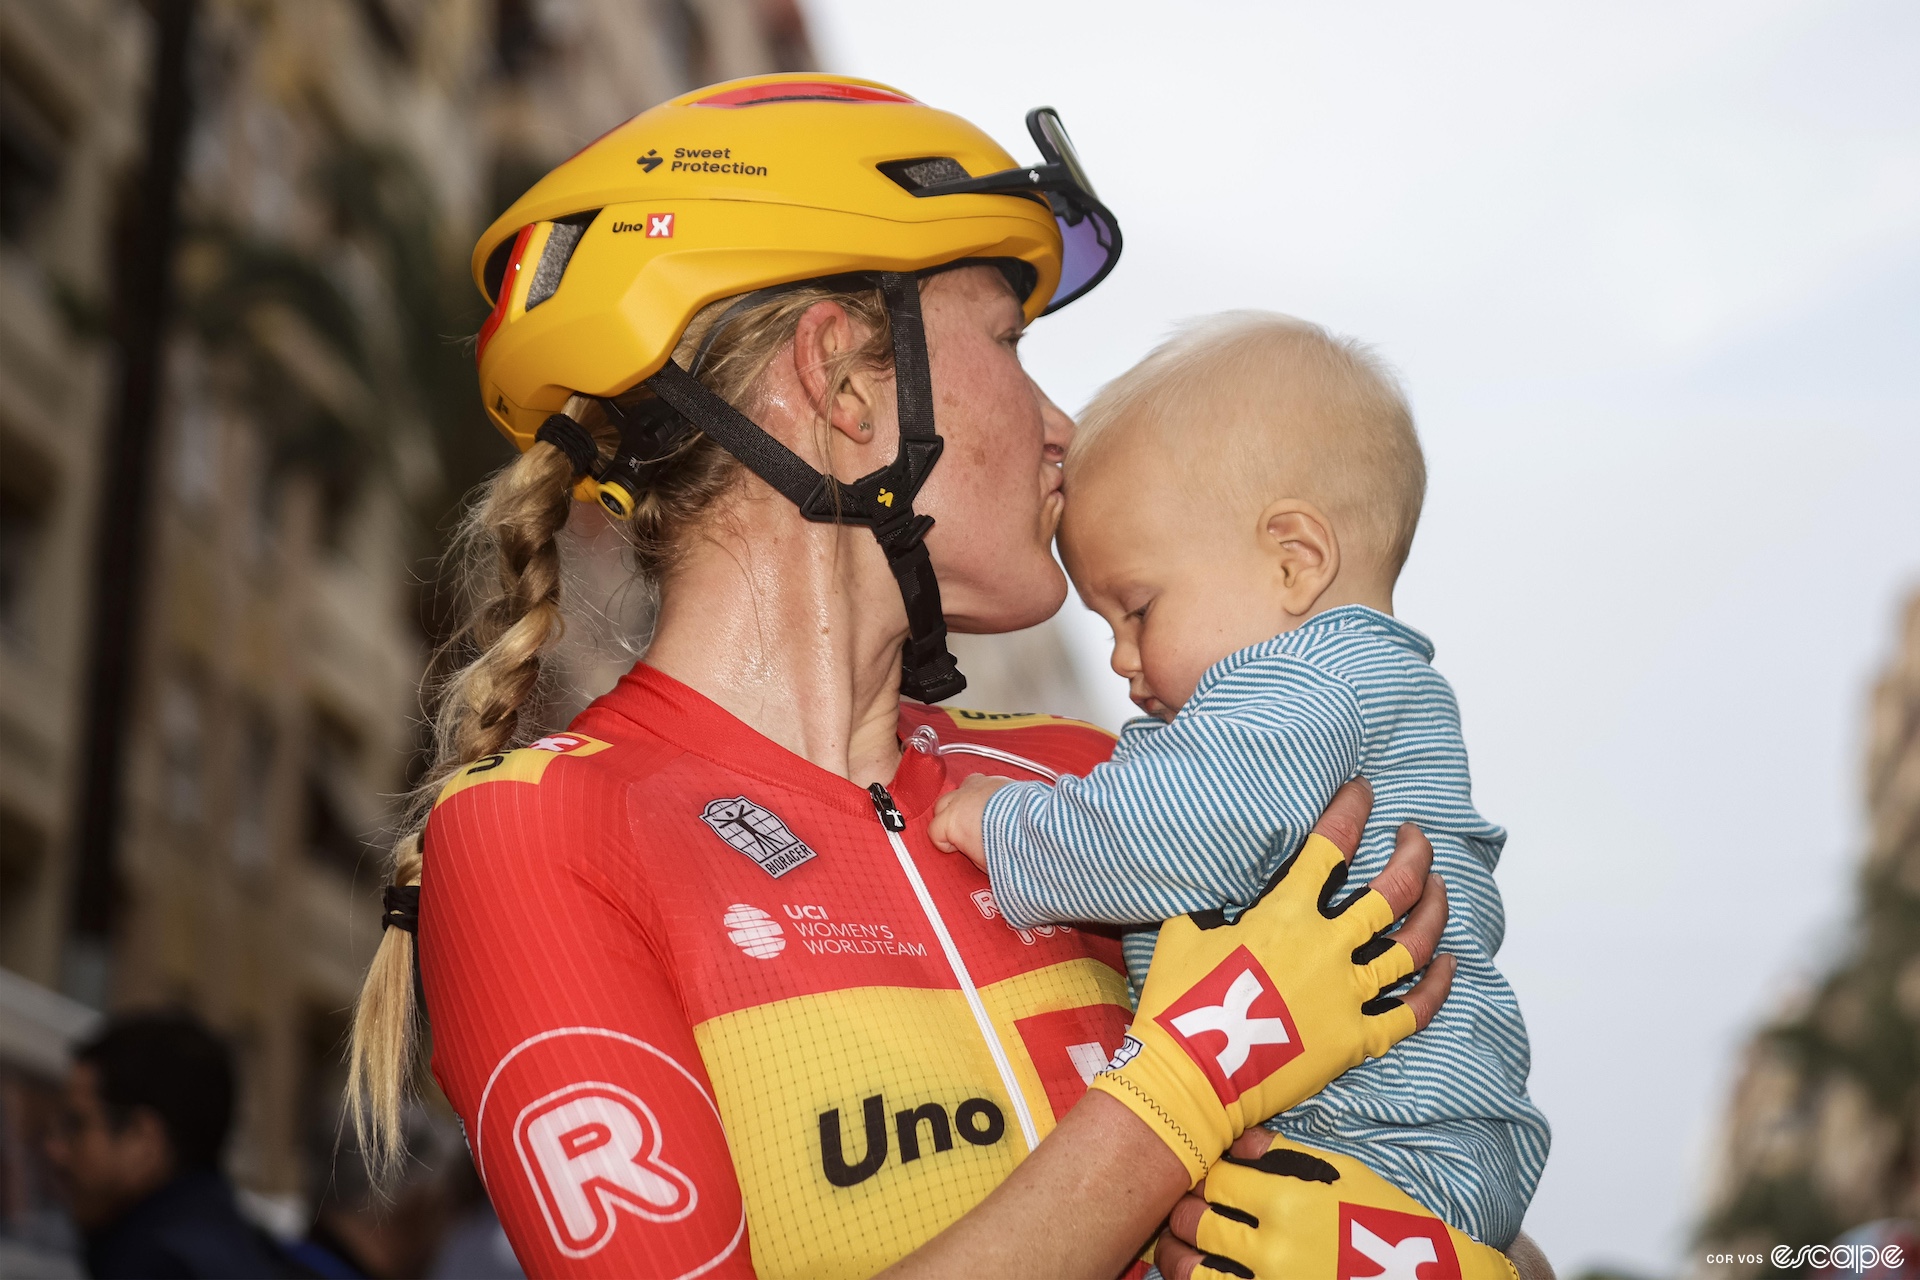 A woman in cycling kit gives her son a kiss on the forehead before starting a bike race